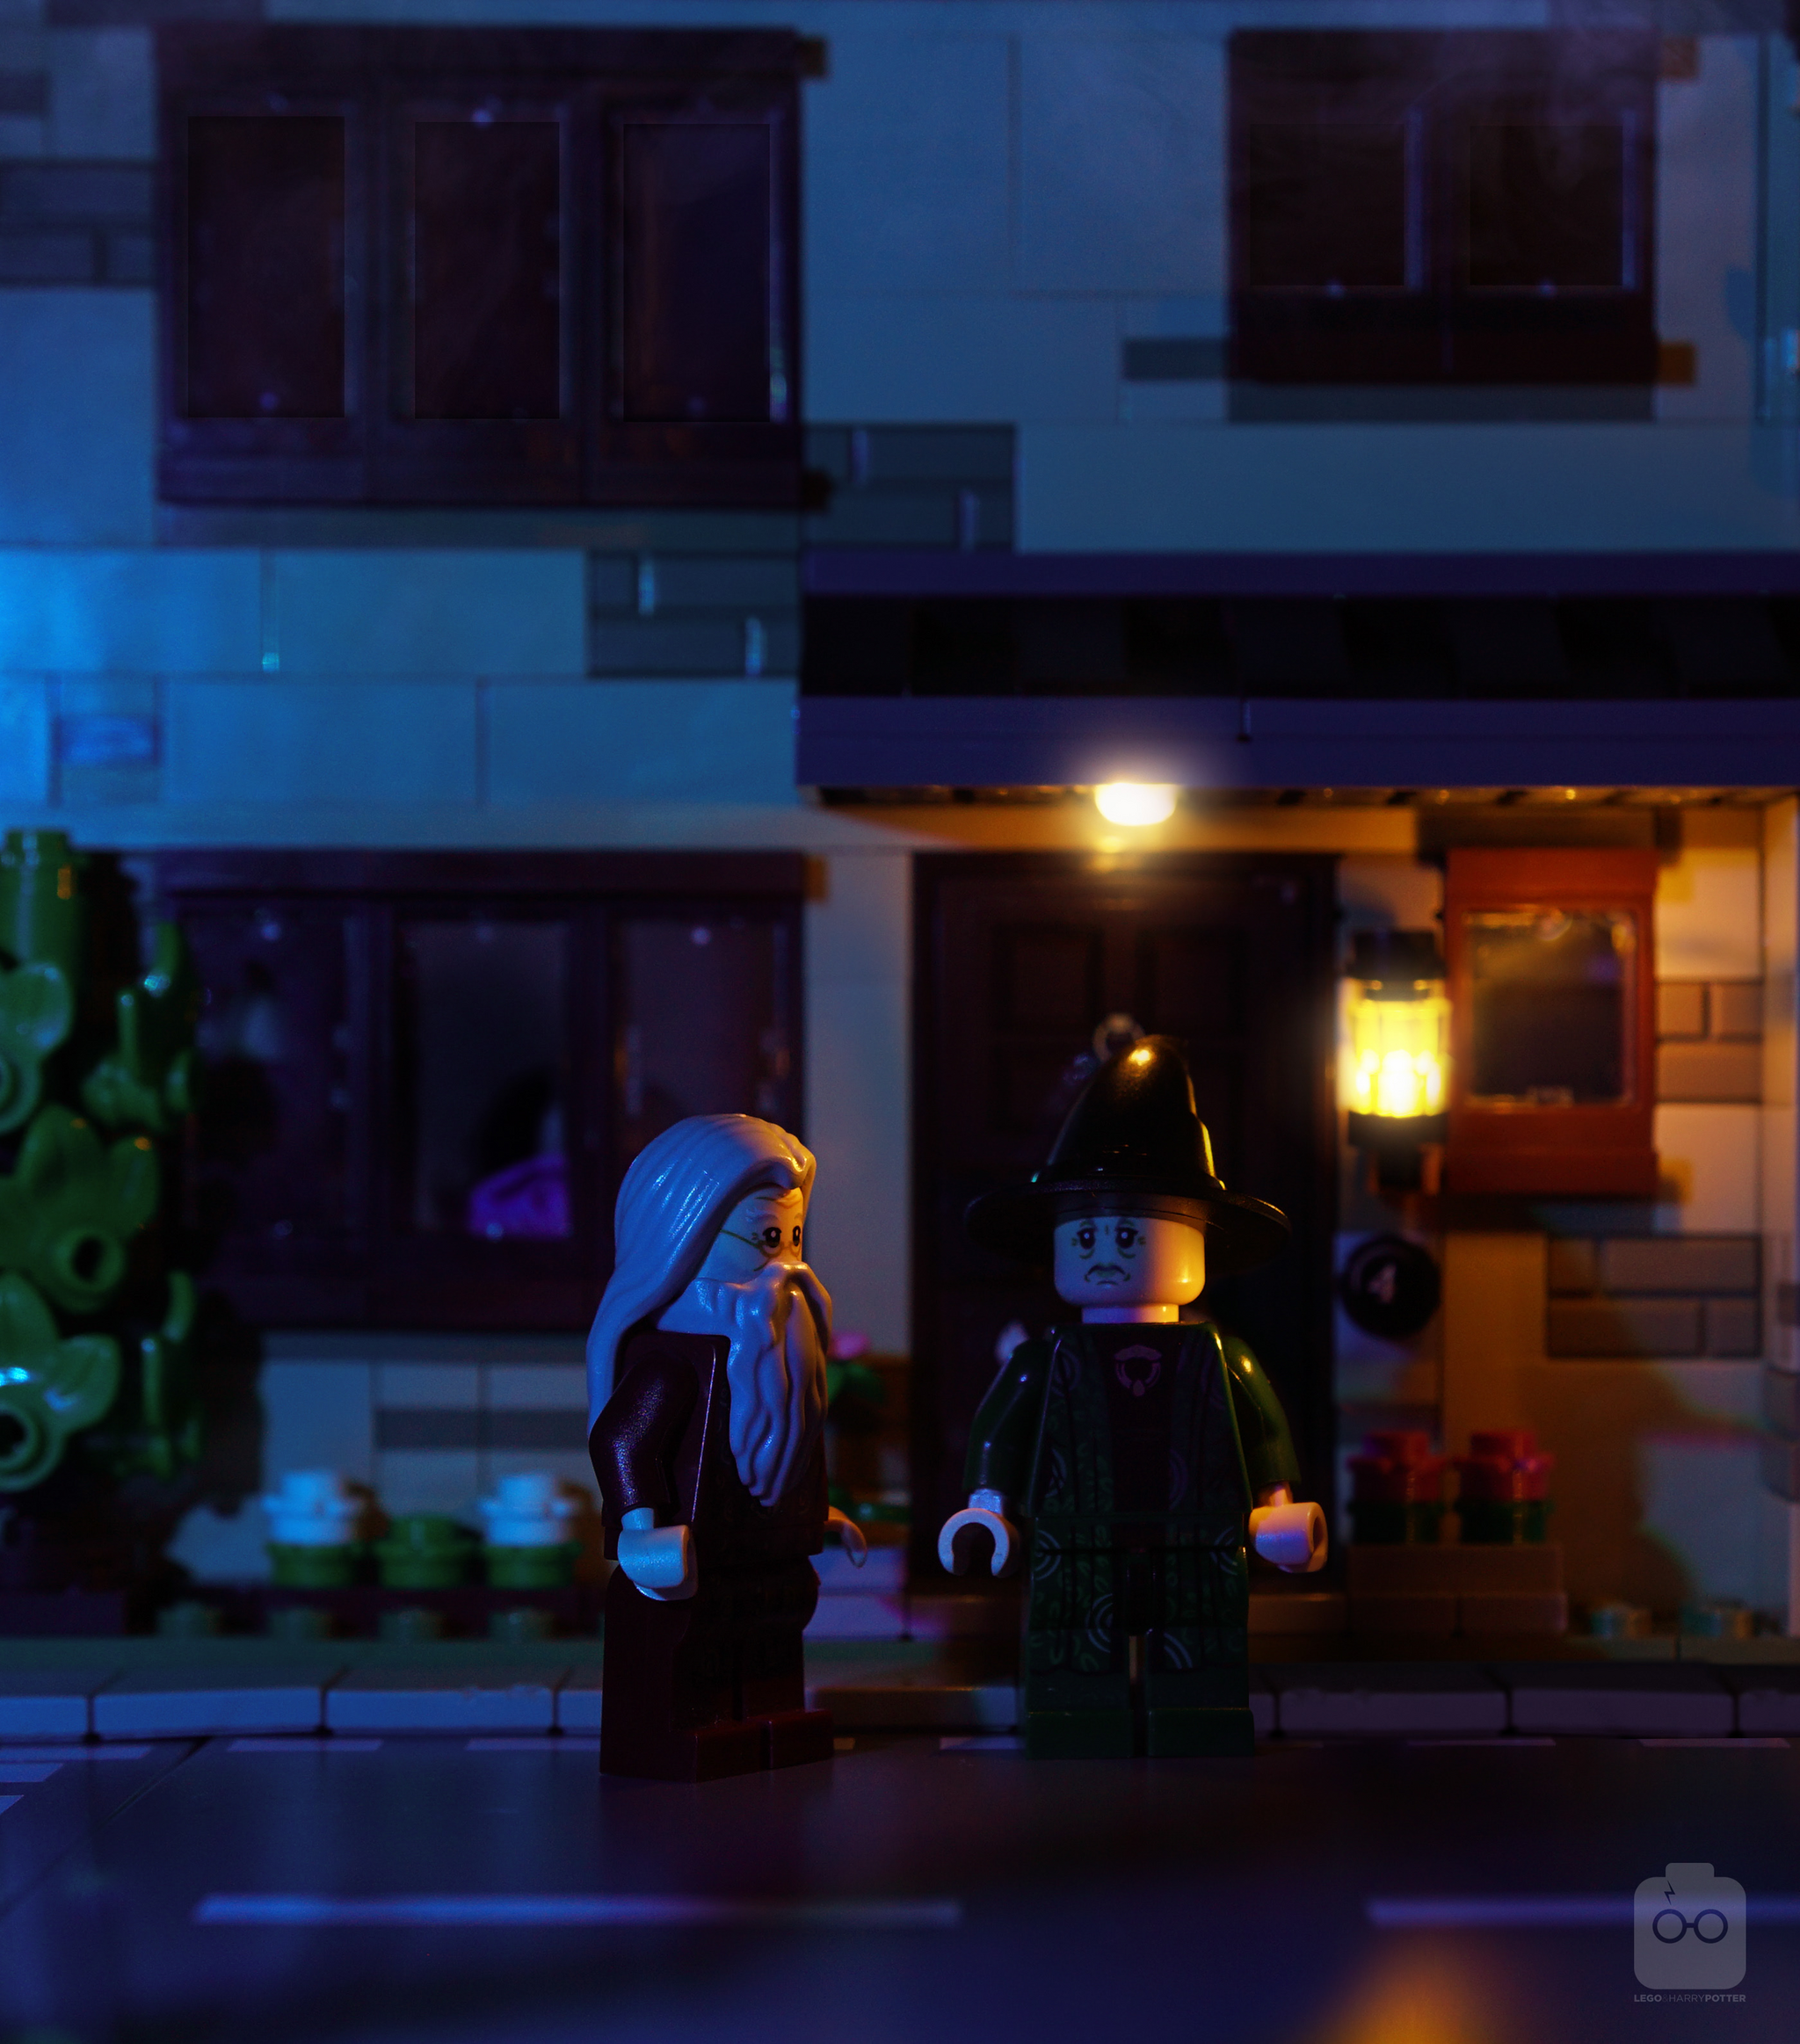 LEGO story of a boy who survived. - Lego, Harry Potter, Albus Dumbledore, Minerva McGonagall, Ron Weasley, Distribution hat, Призрак, Mirror Einalezh, Professor Quirrell, Hermione, Hagrid, Quidditch, Severus Snape, Longpost, Harry Potter and the Philosopher's Stone